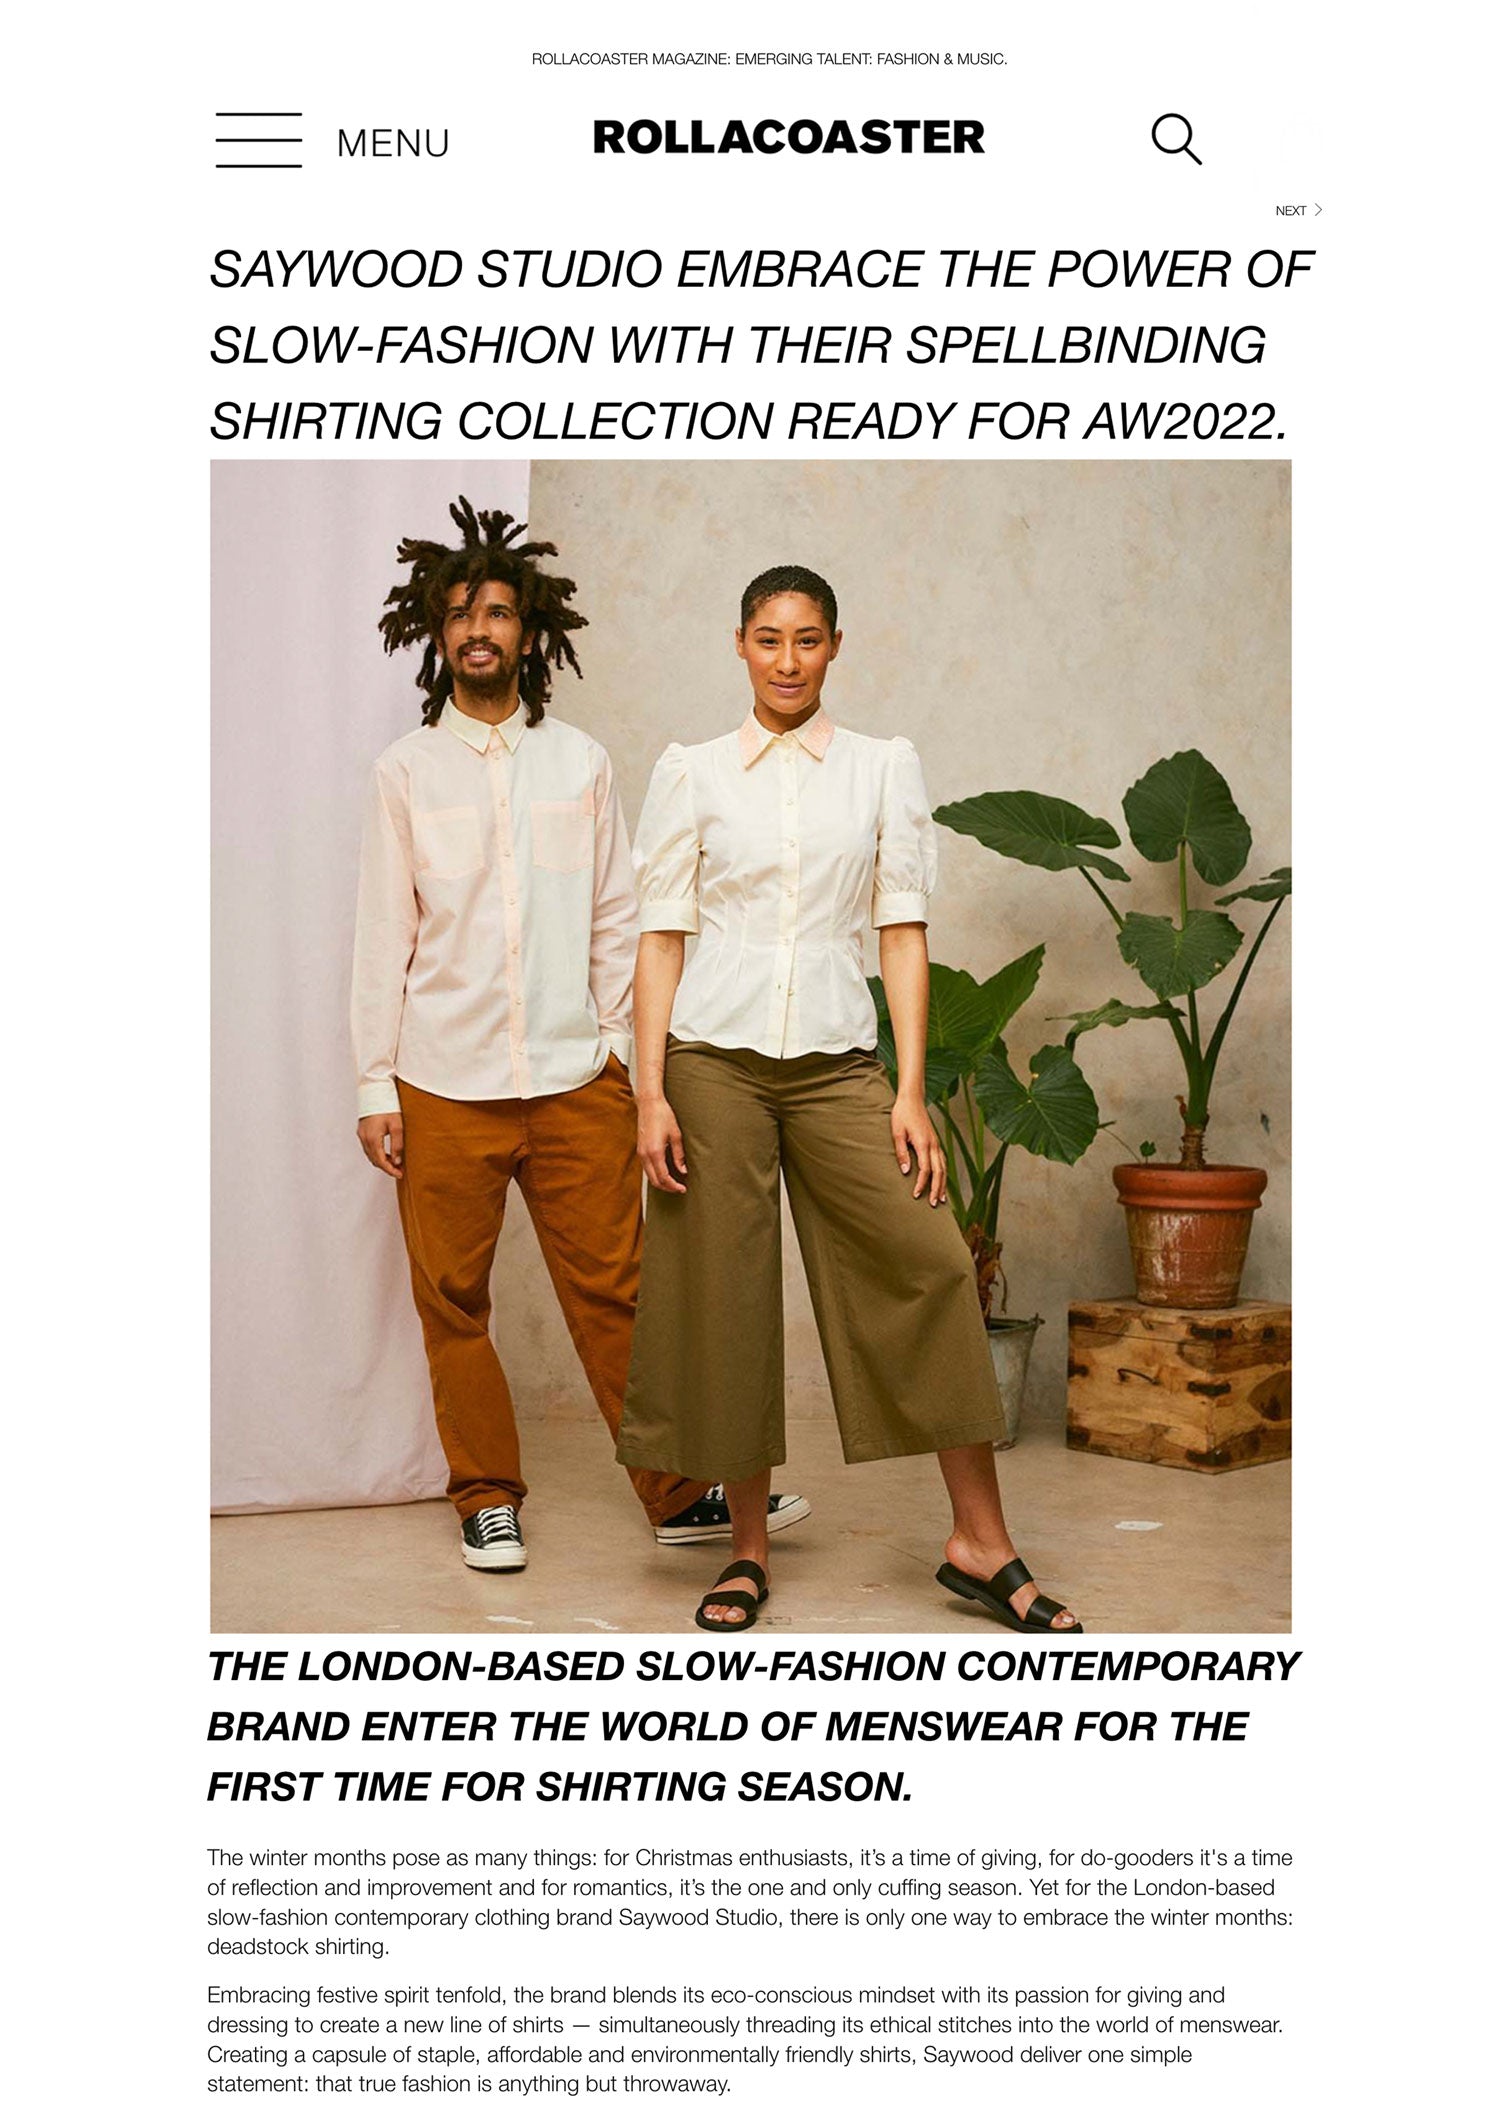 Rollacoaster feature on Saywood. Title reads "SAYWOOD STUDIO EMBRACE THE POWER OF SLOW-FASHION WITH THEIR SPELL BINDING SHIRTING COLLECTION READY FOR AW2022"